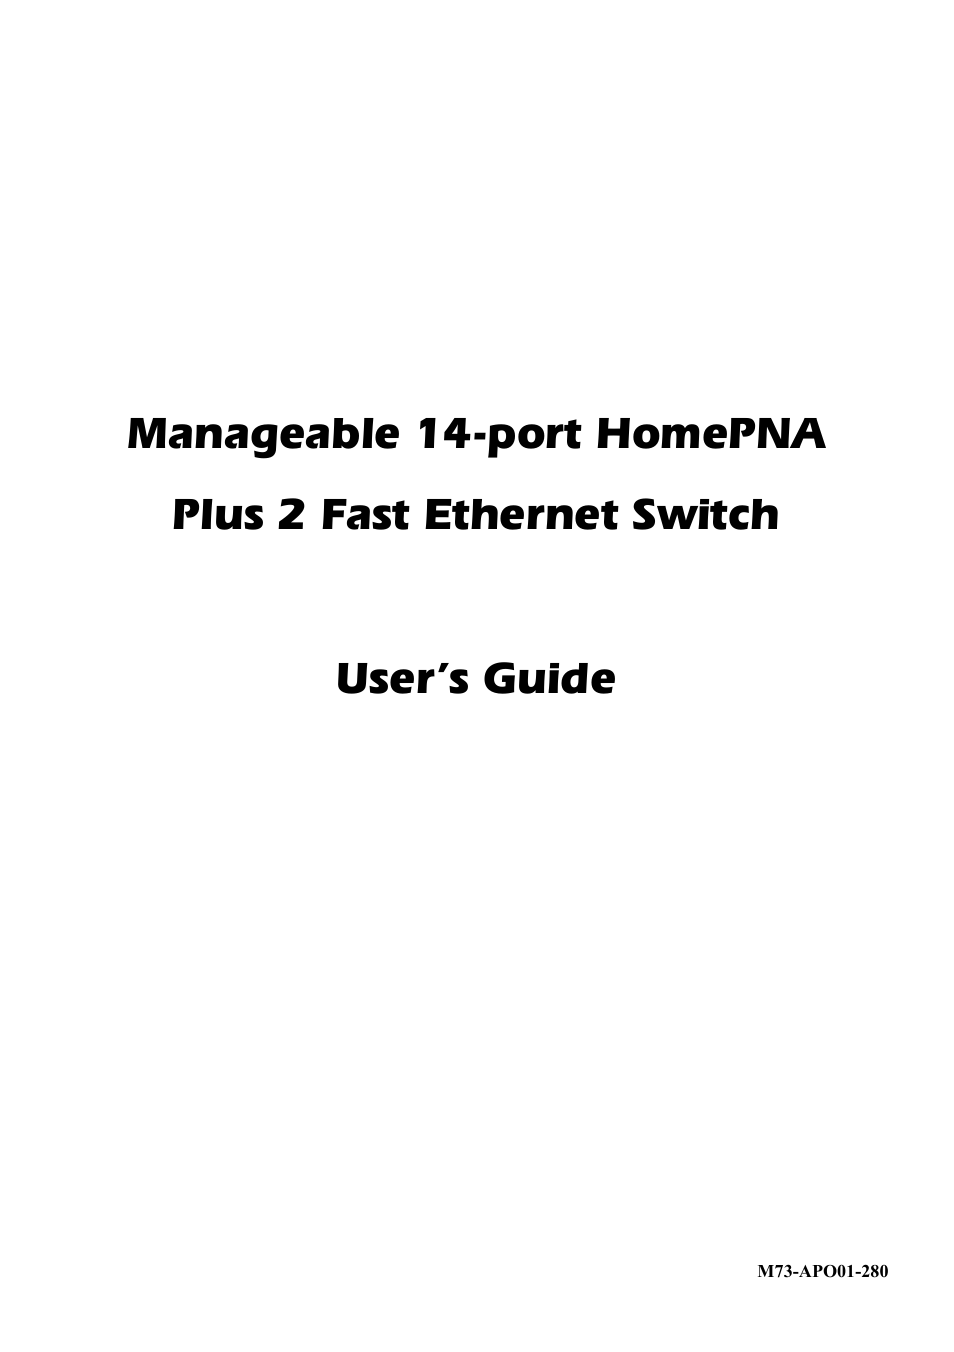 Manageable 14-port HomePNA Plus 2 Fast Ethernet Switch (Page 1)